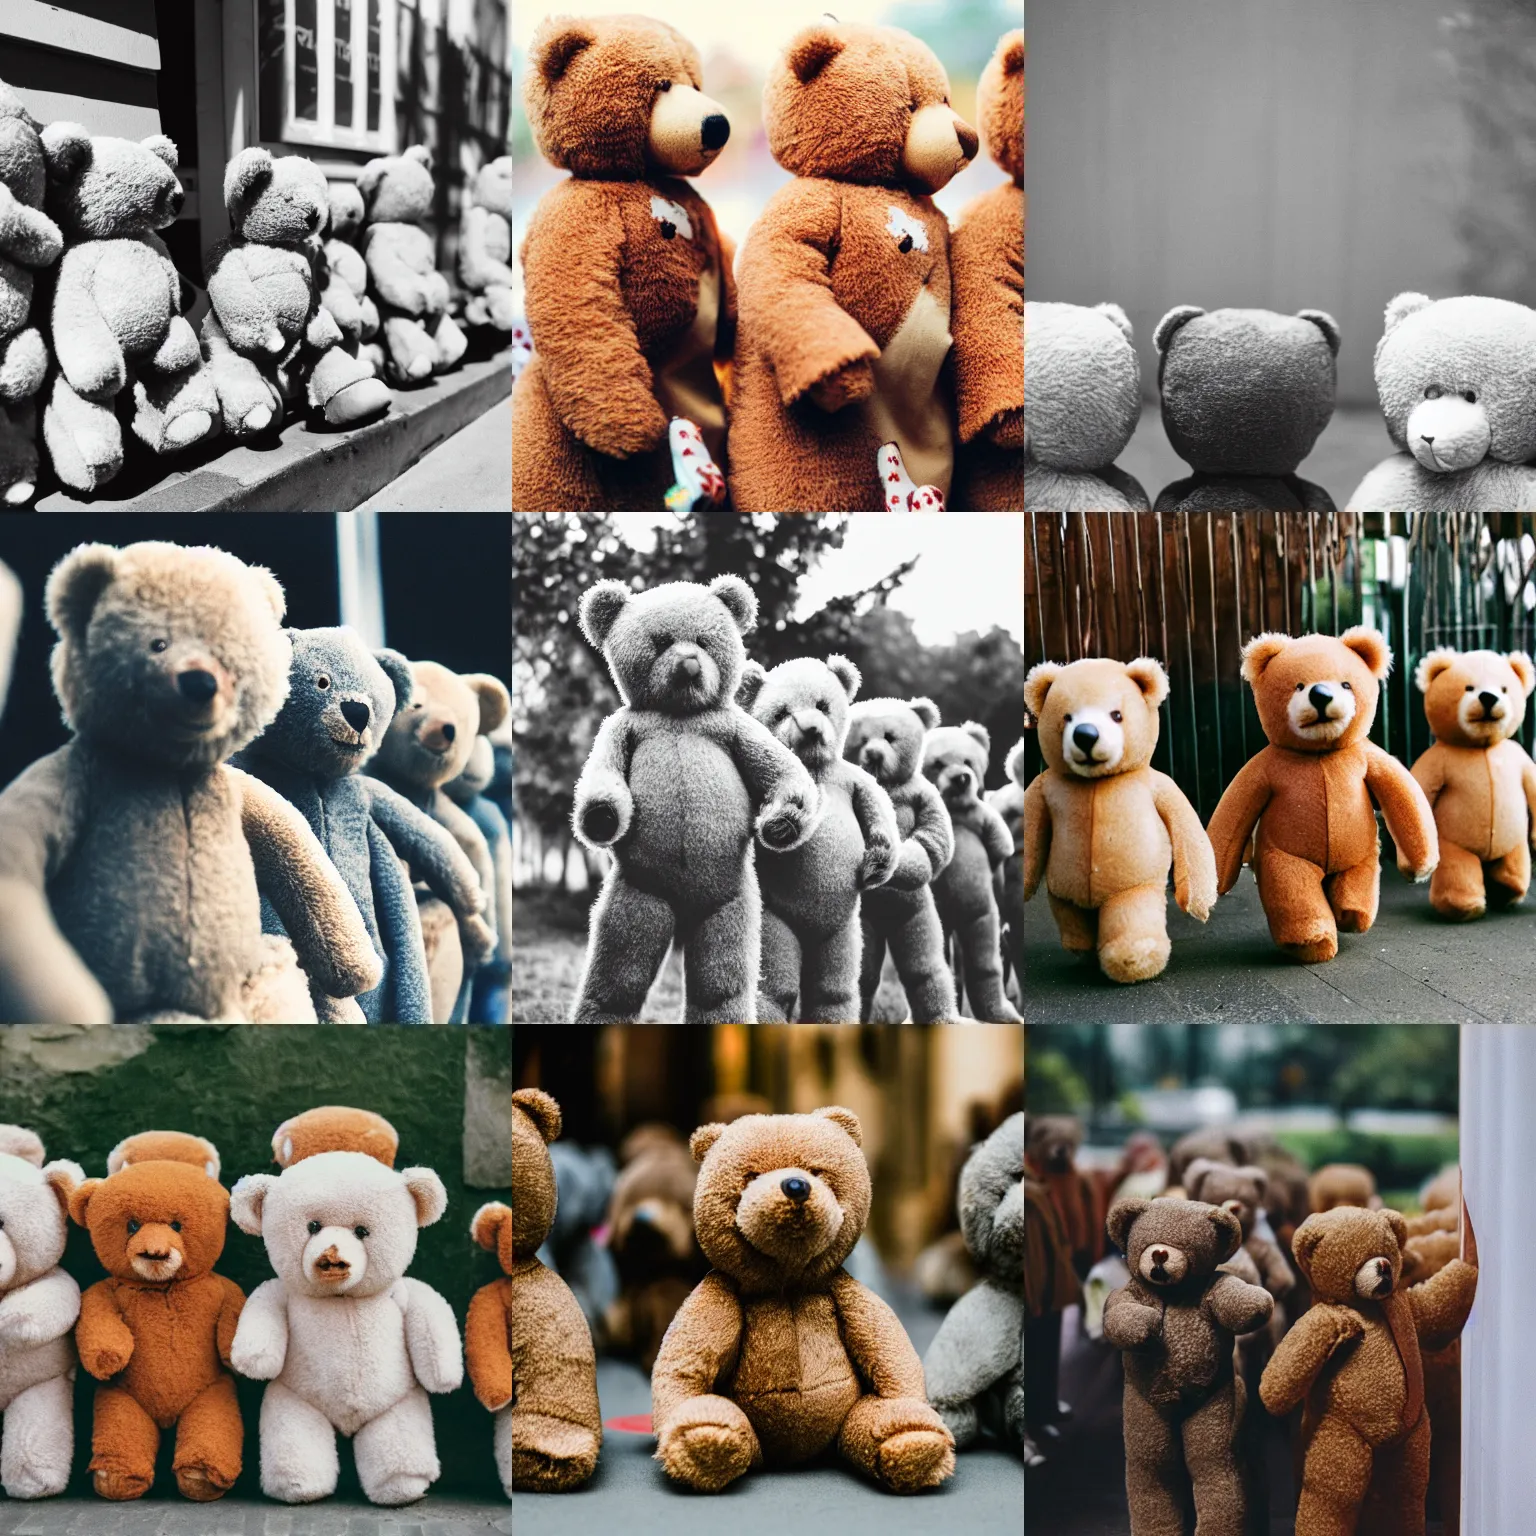 Prompt: Teddy bears standing in line, 35mm photography